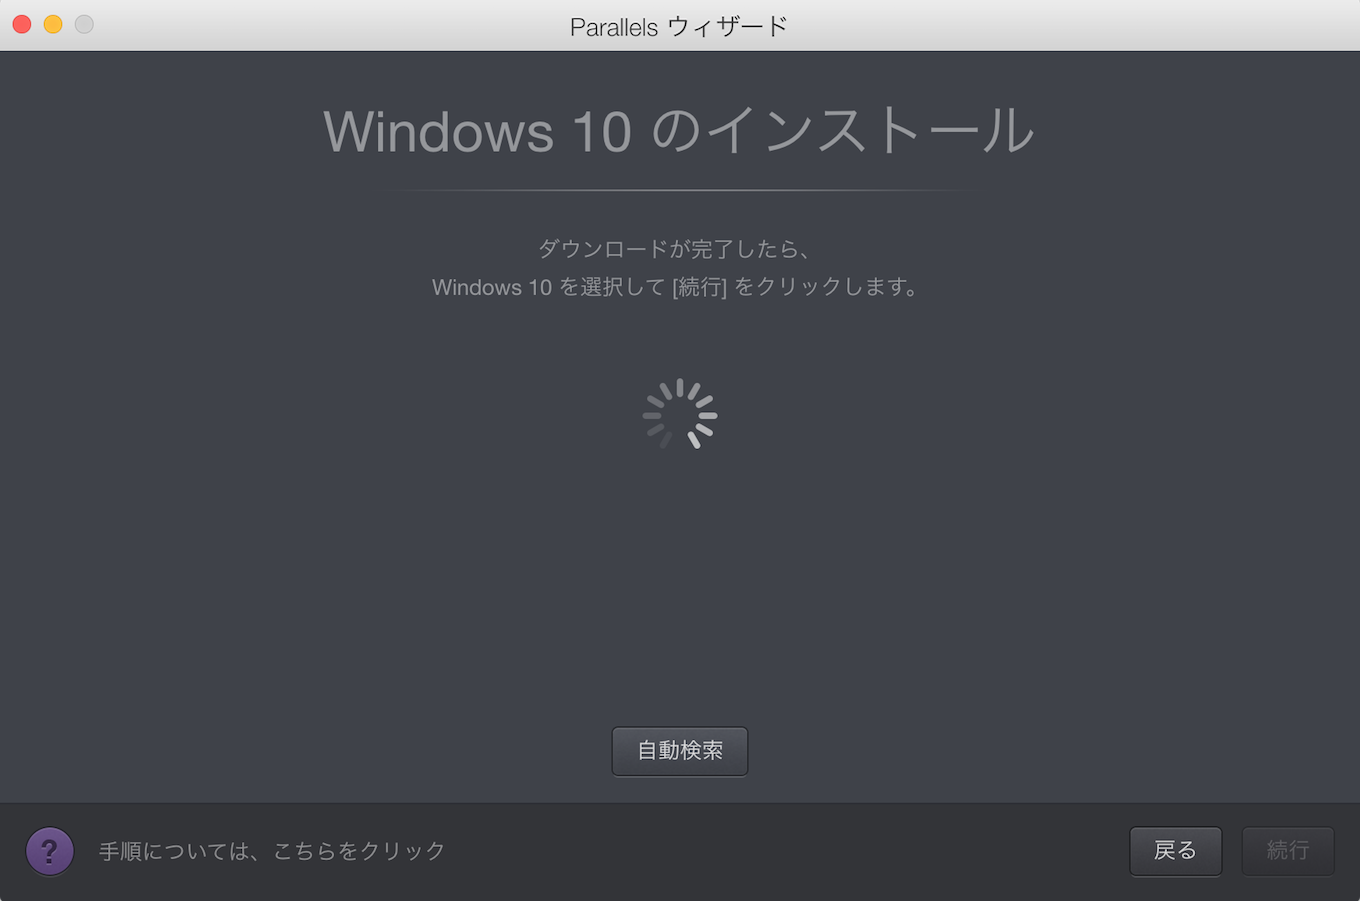 how-to_install_windows10_in_parallels_desktop_for_mac19